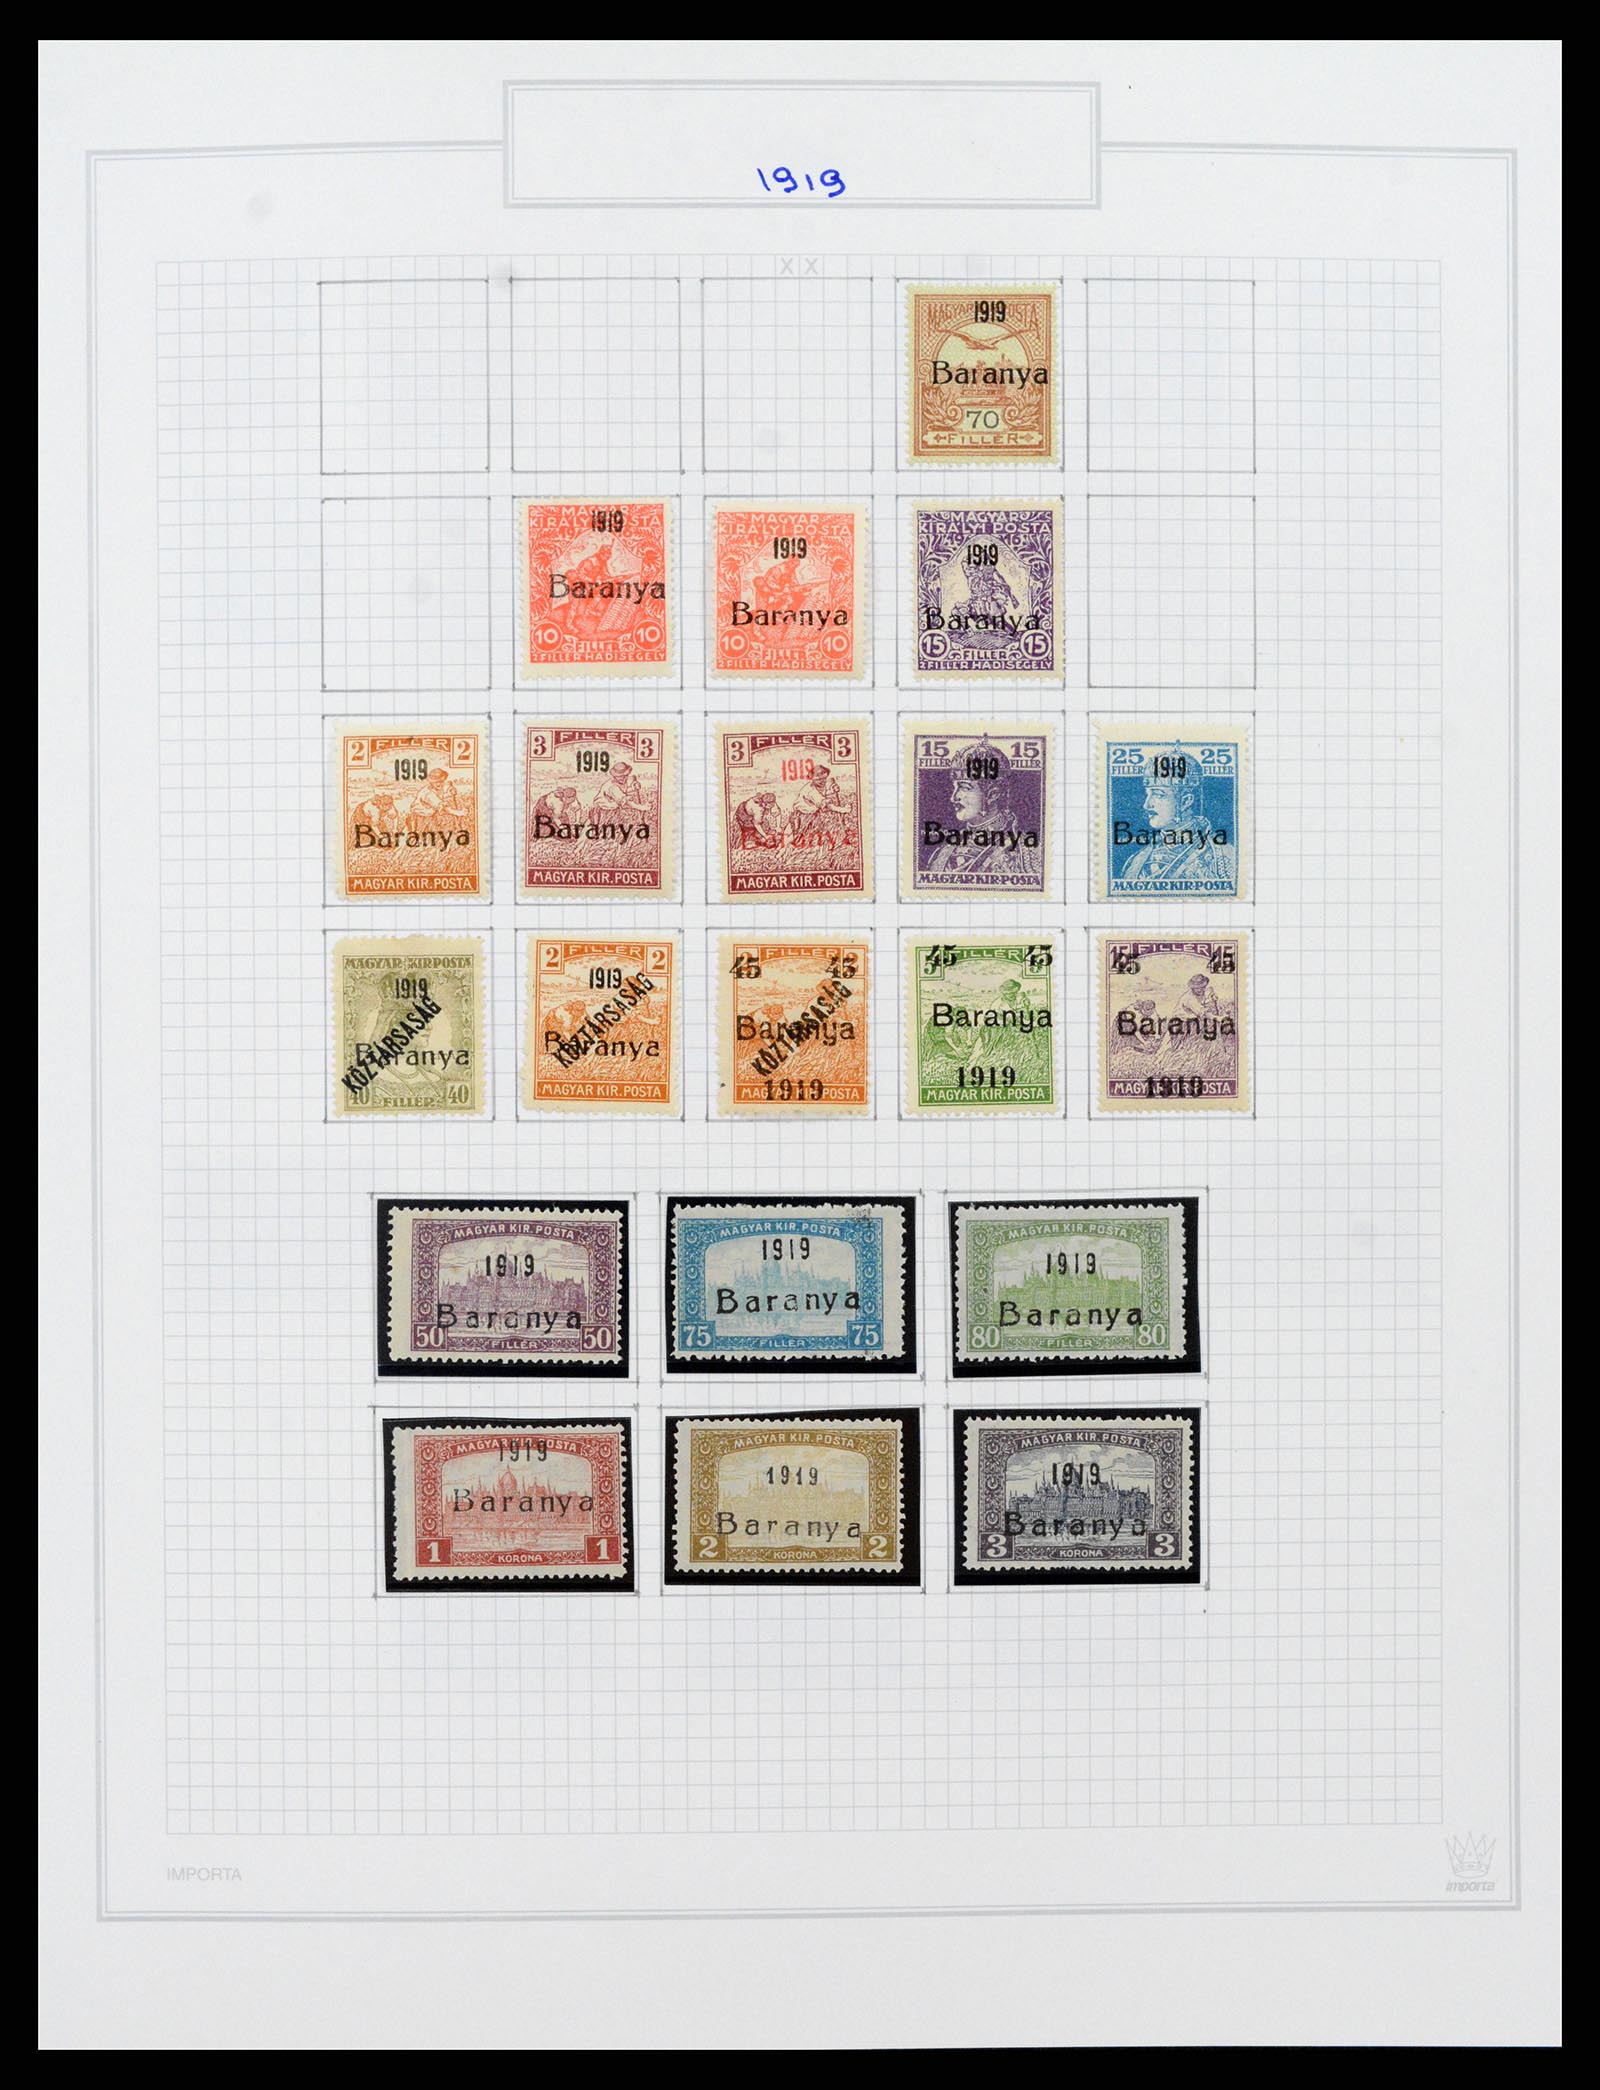 37092 038 - Stamp collection 37092 Hungary 1871-2018.